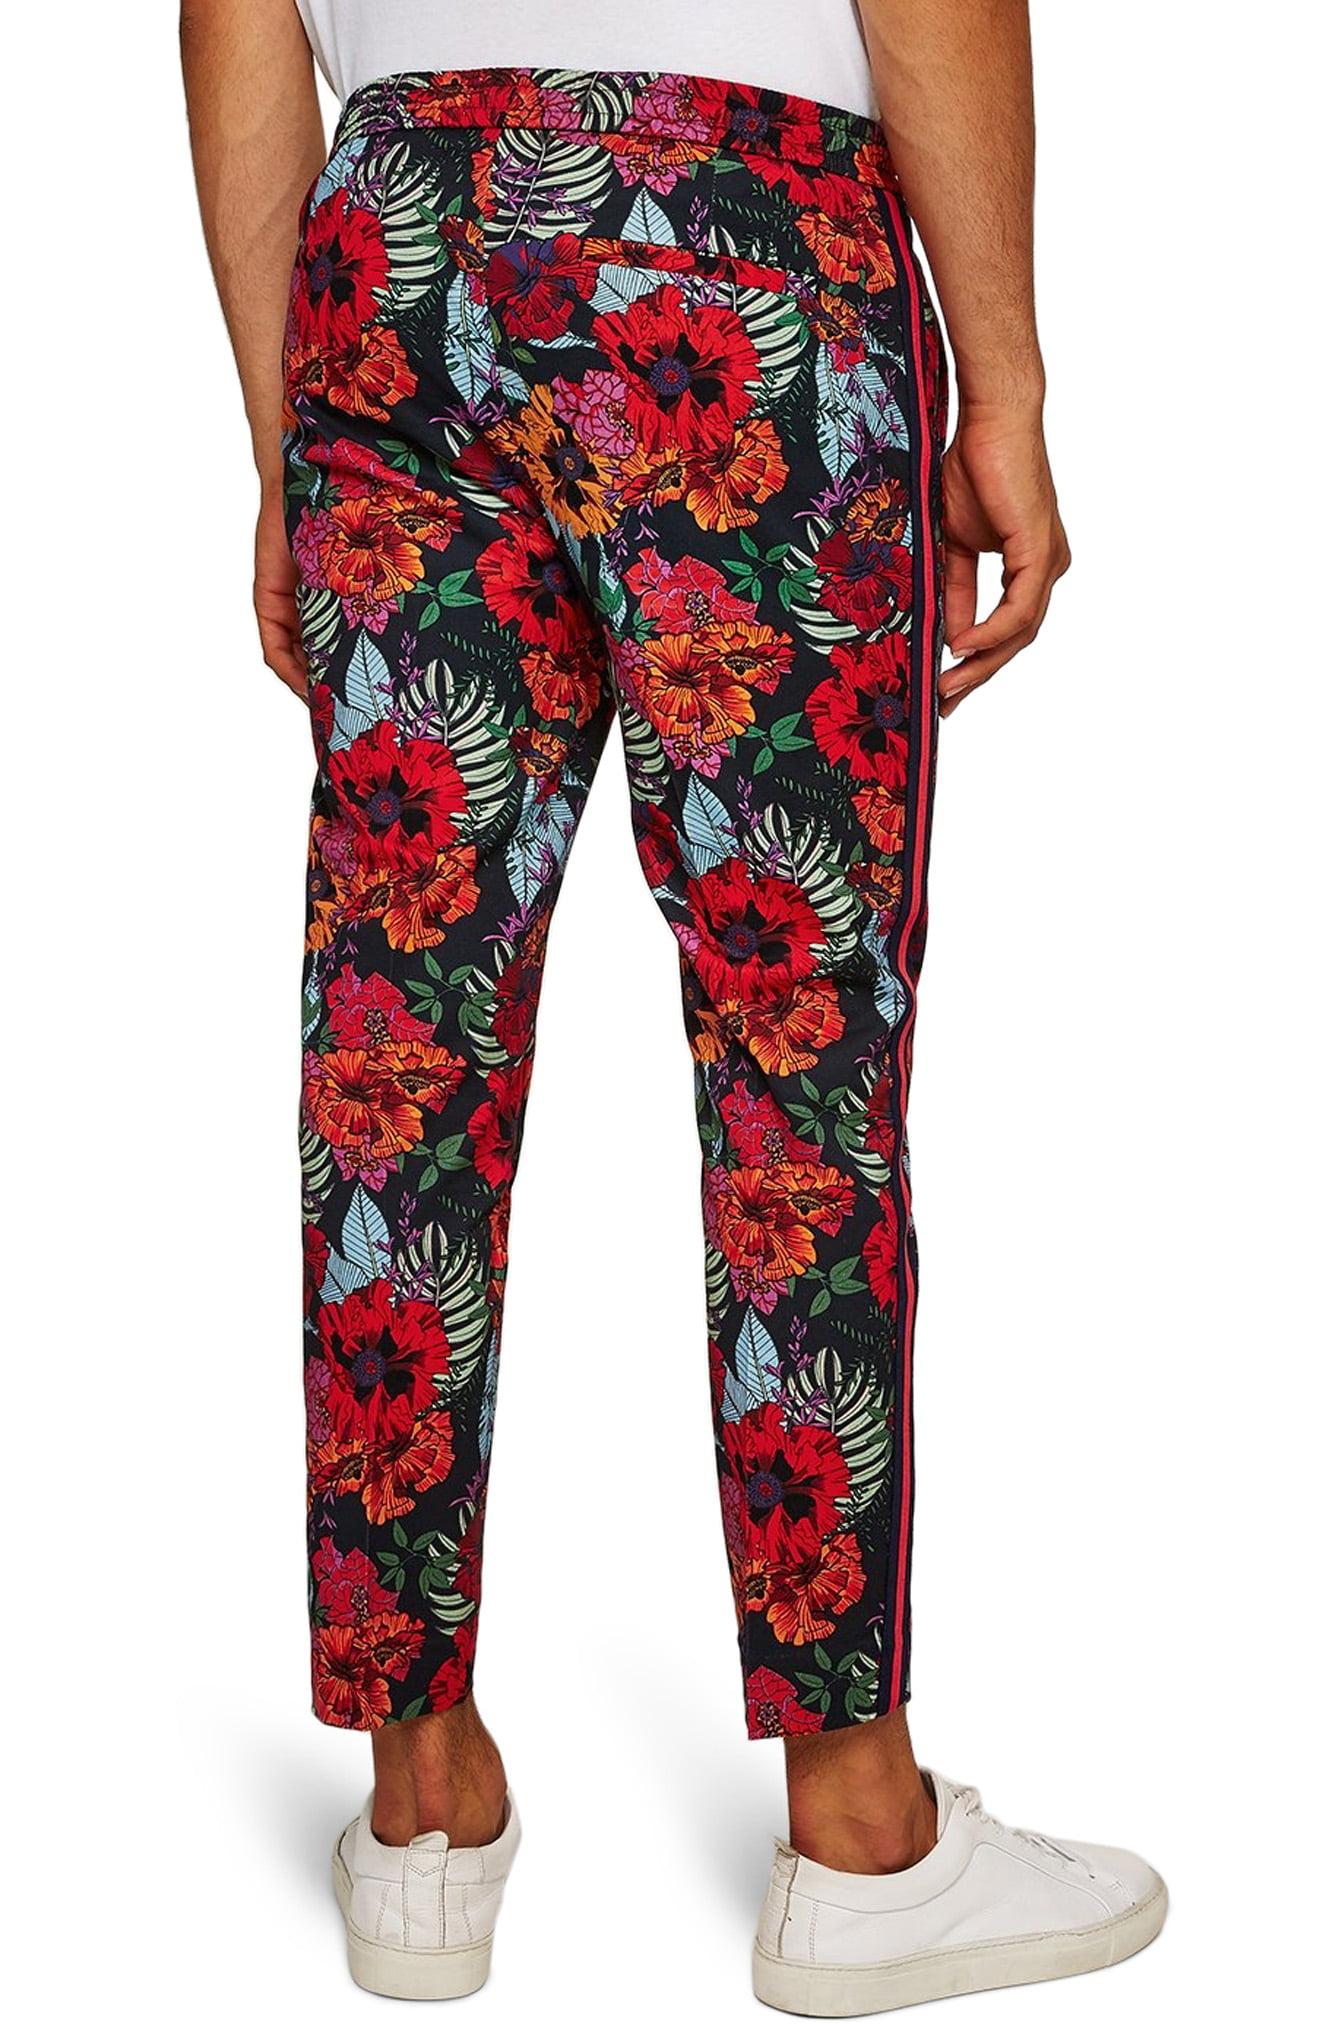 TOPMAN Topshop Floral Jogger Pants in Red for Men - Lyst